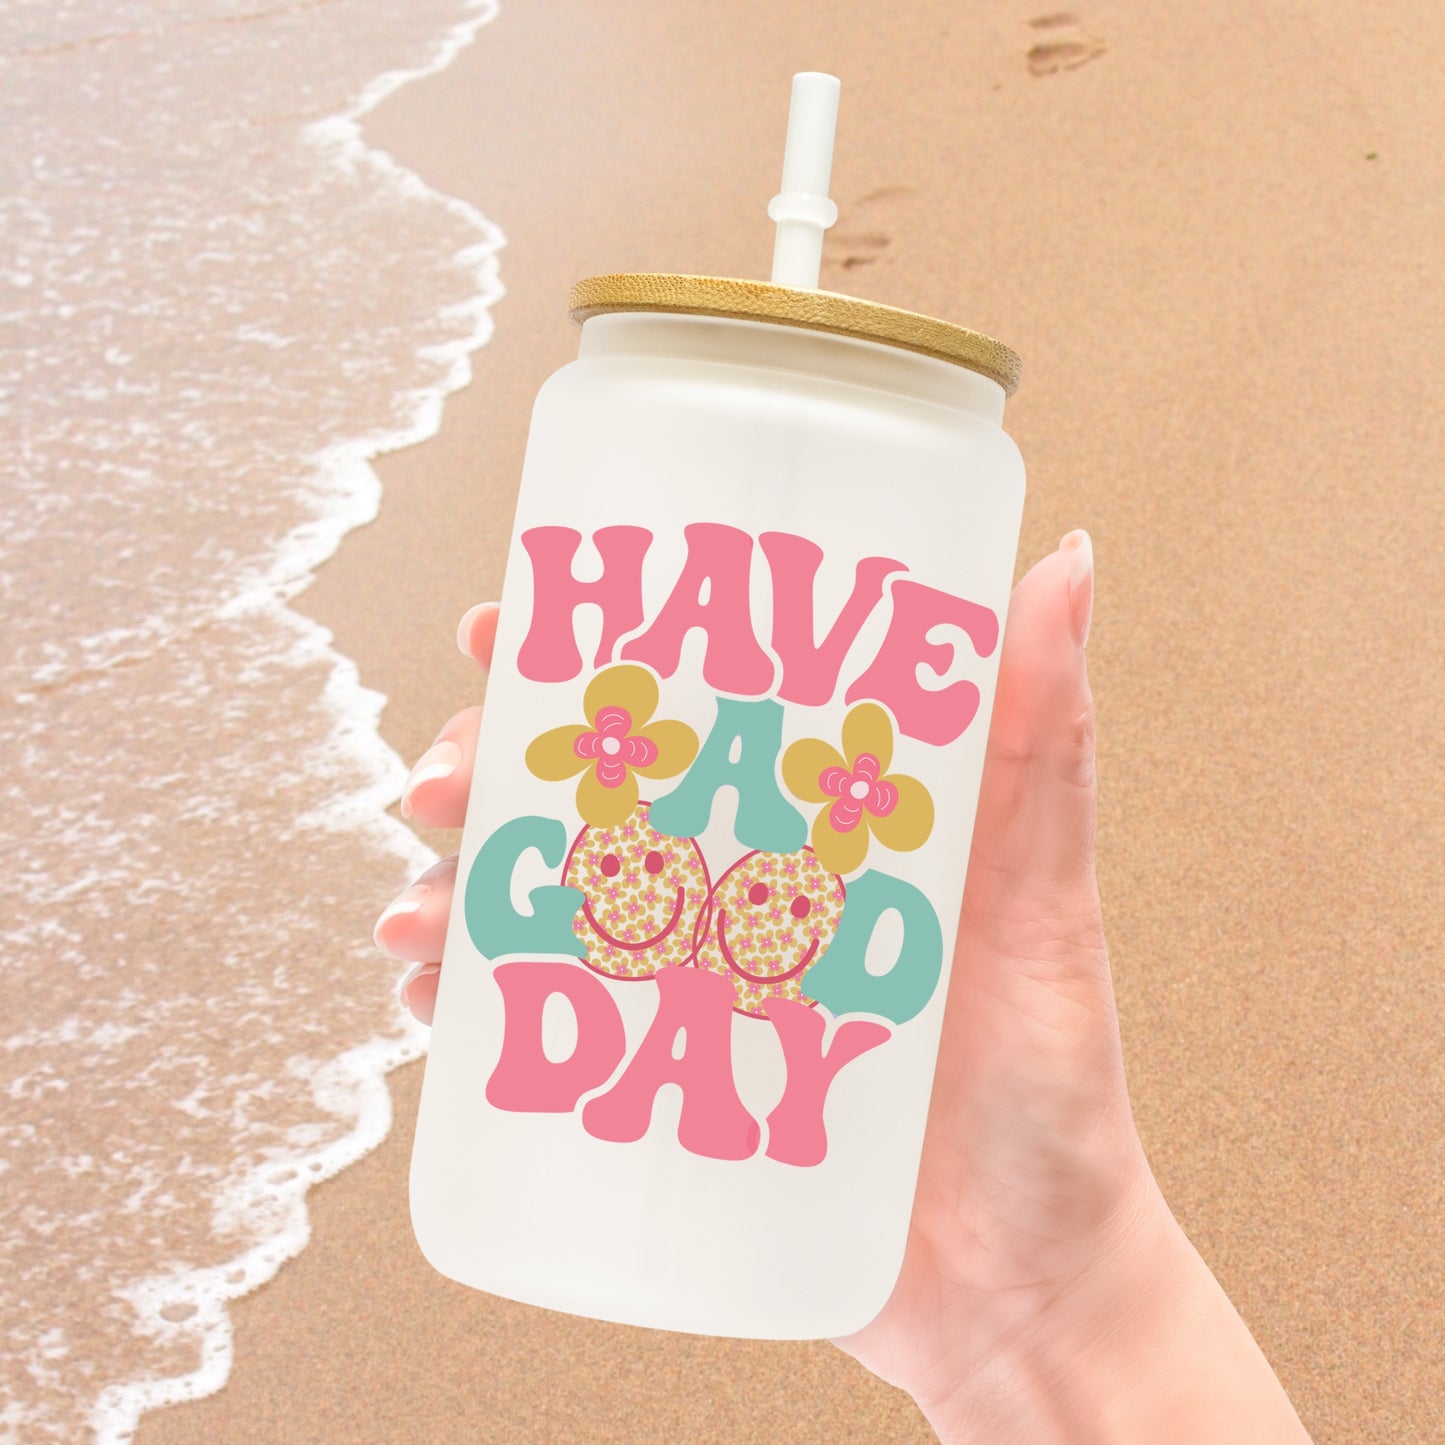 "Have a good day groovy" retro spring adhesive decal DTF